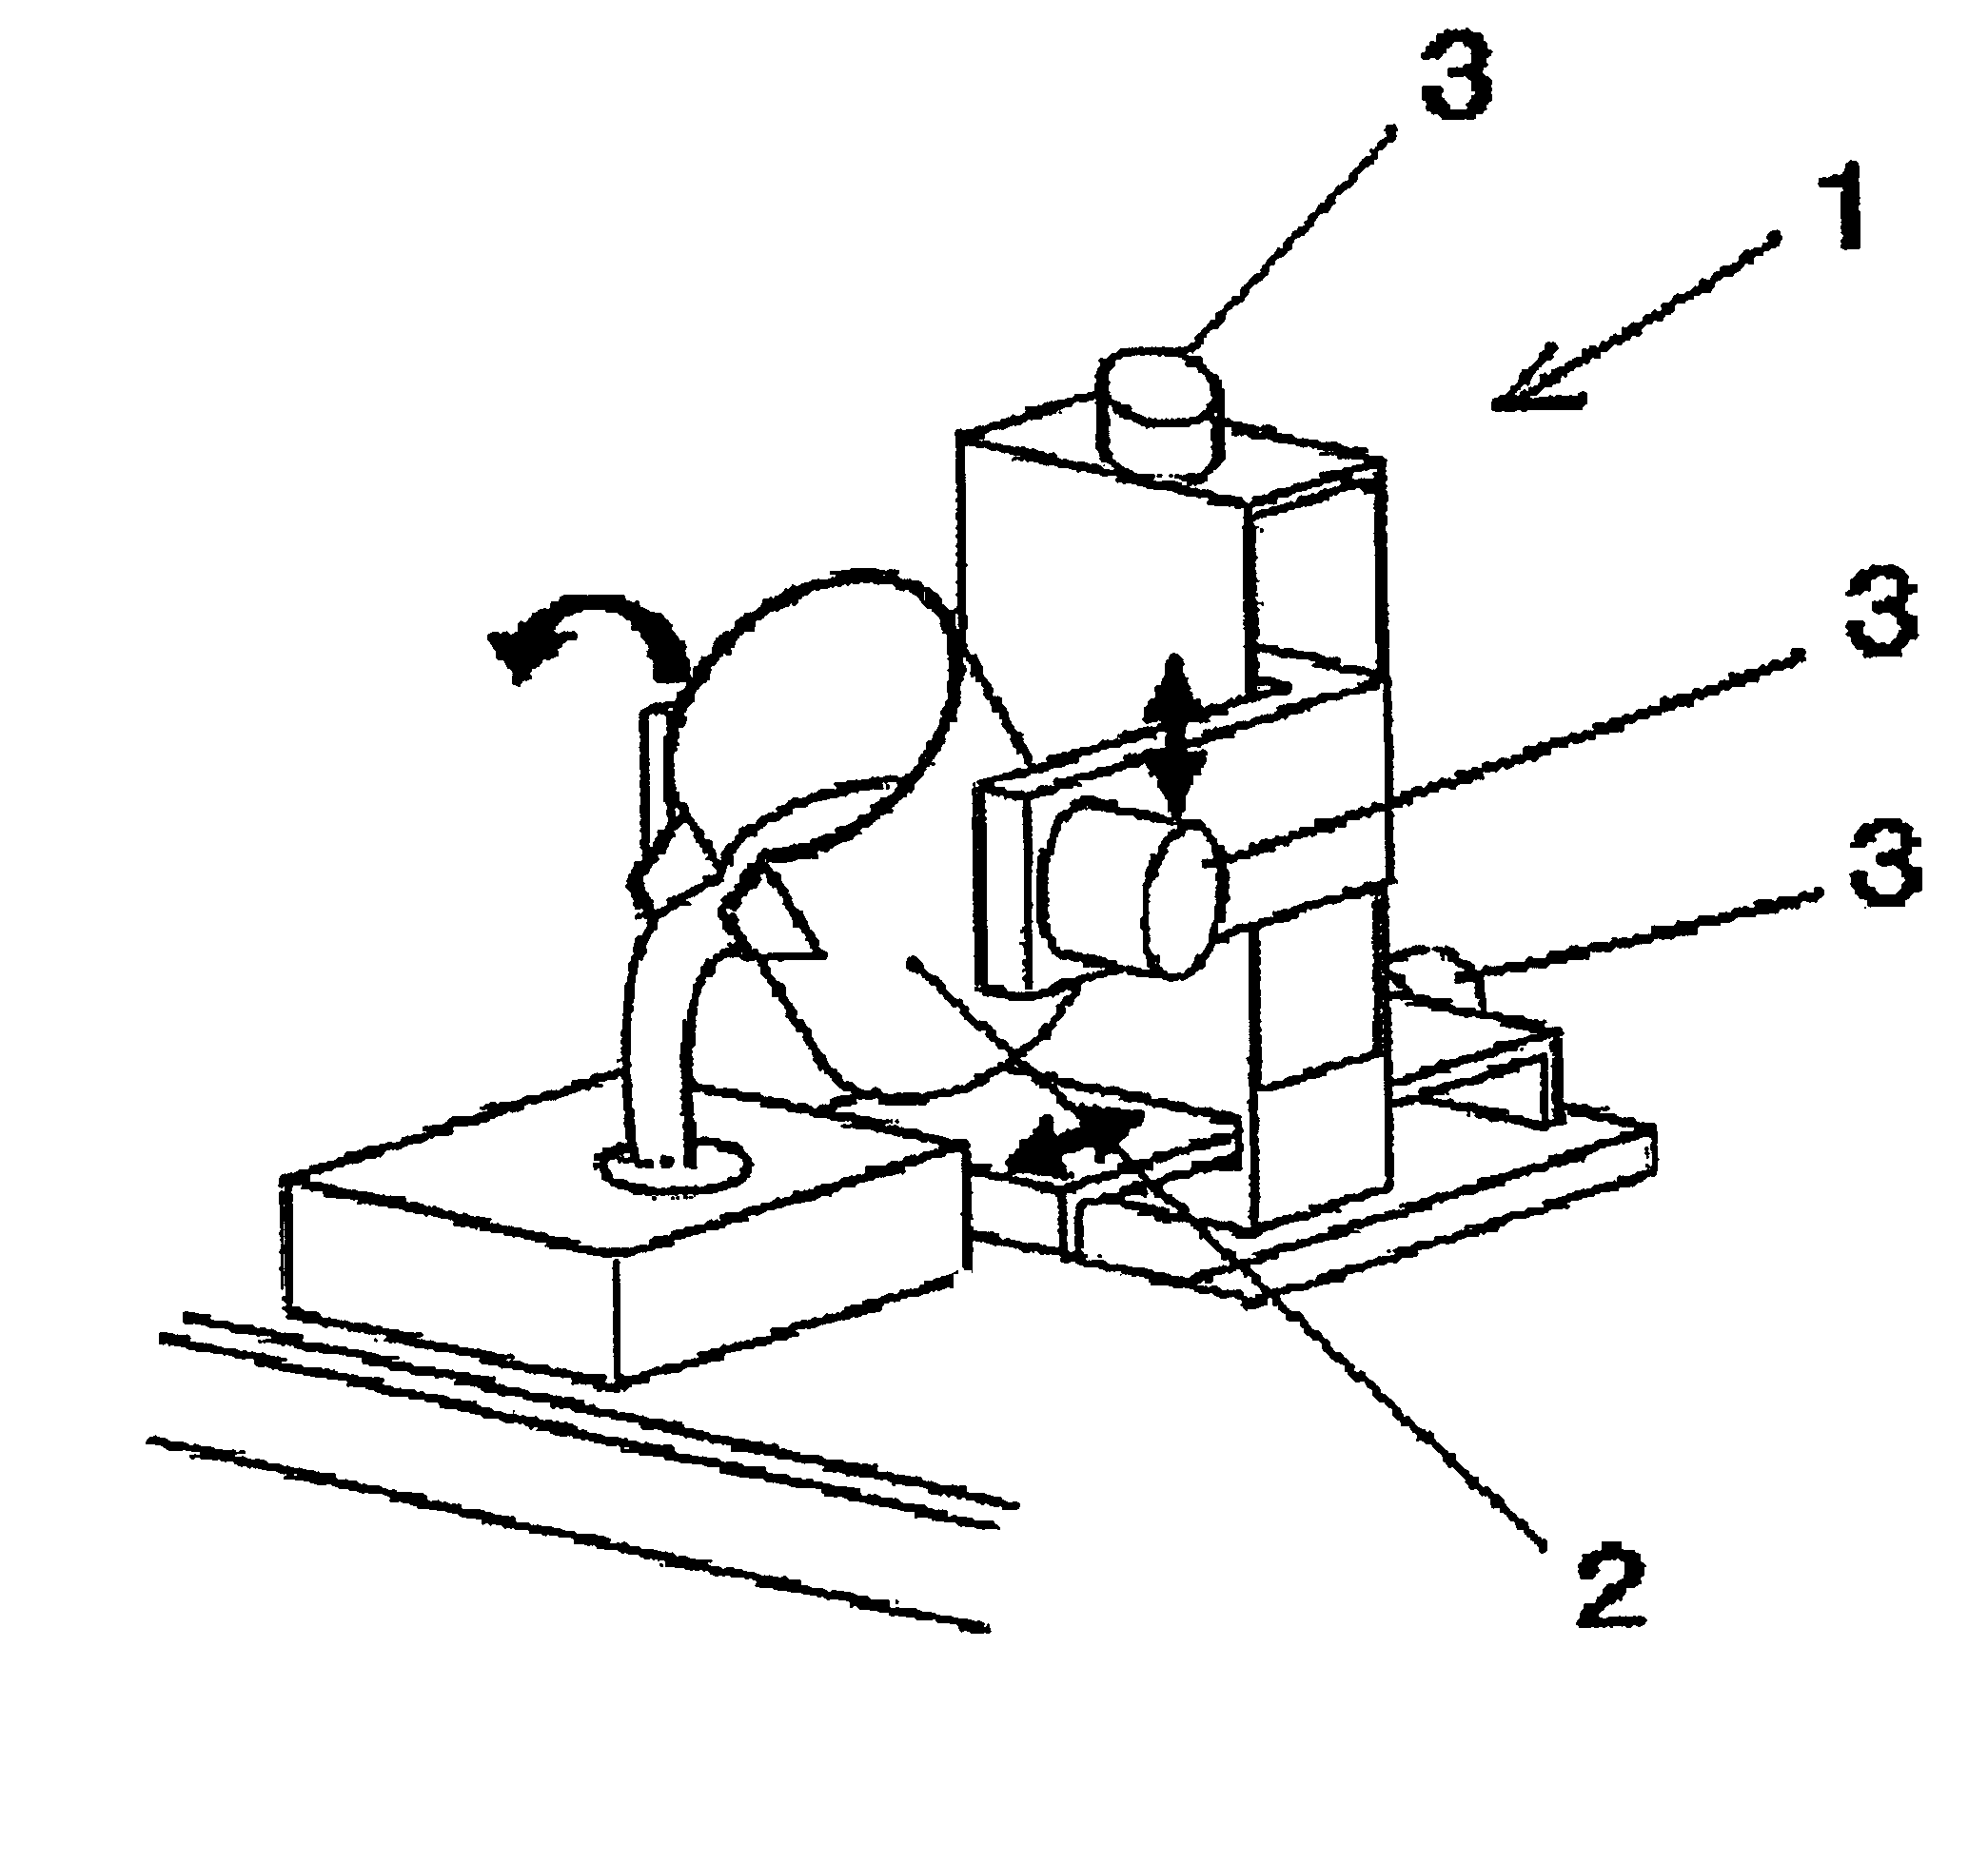 Tilting-type automatic pouring method and a medium that stores programs to control the tilting of a ladle